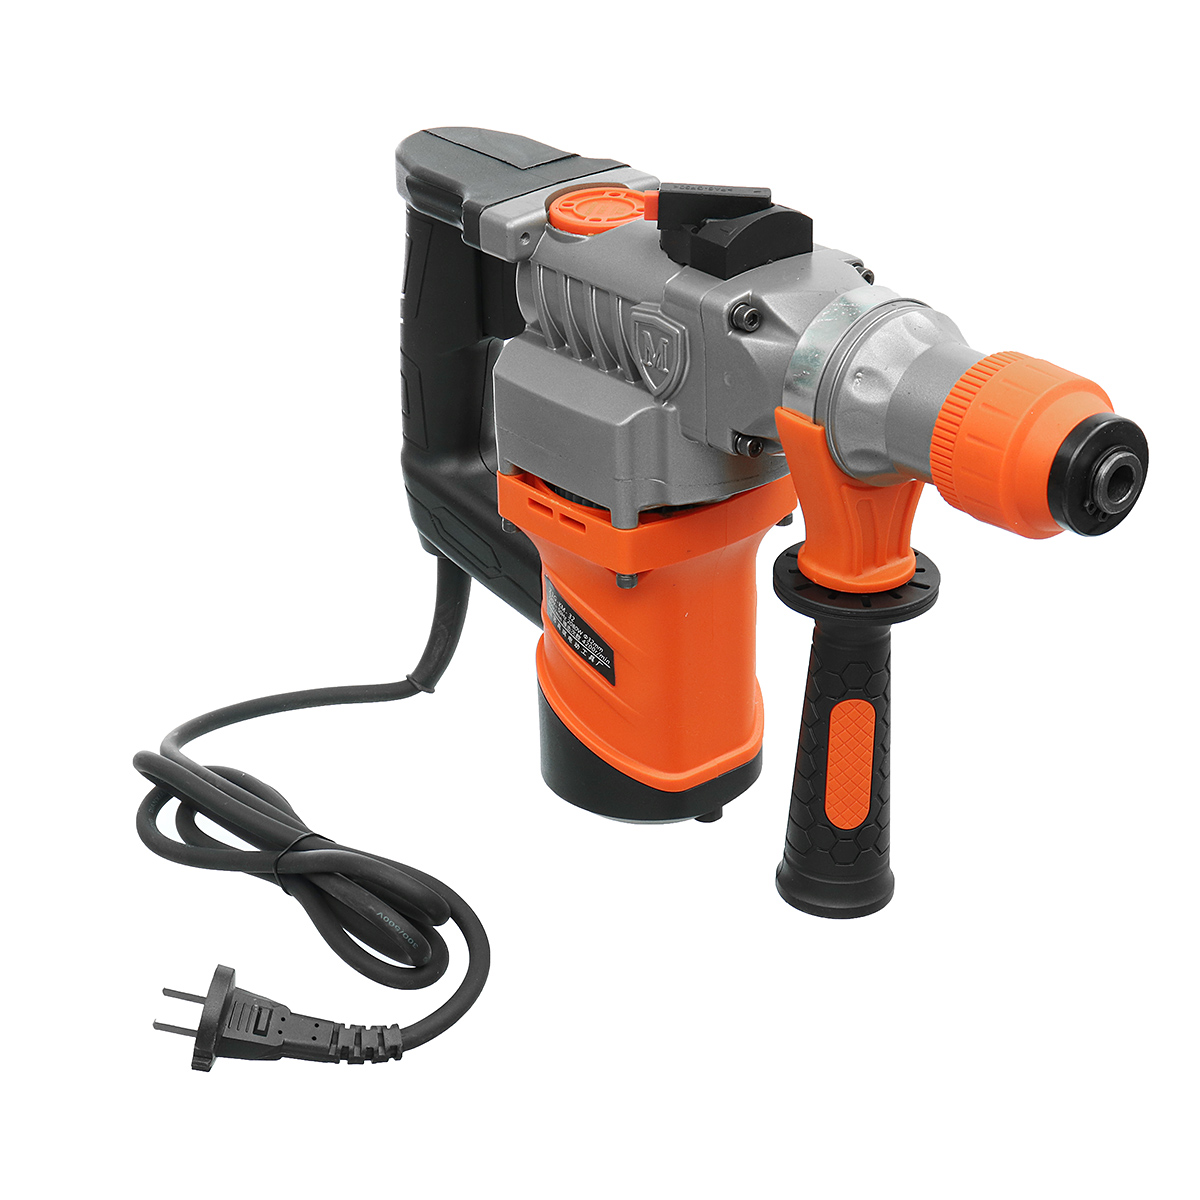 

1680W/2280W Electric Hammer Demolition Jack Hammer Drill Double Insulated Concrete Breaker